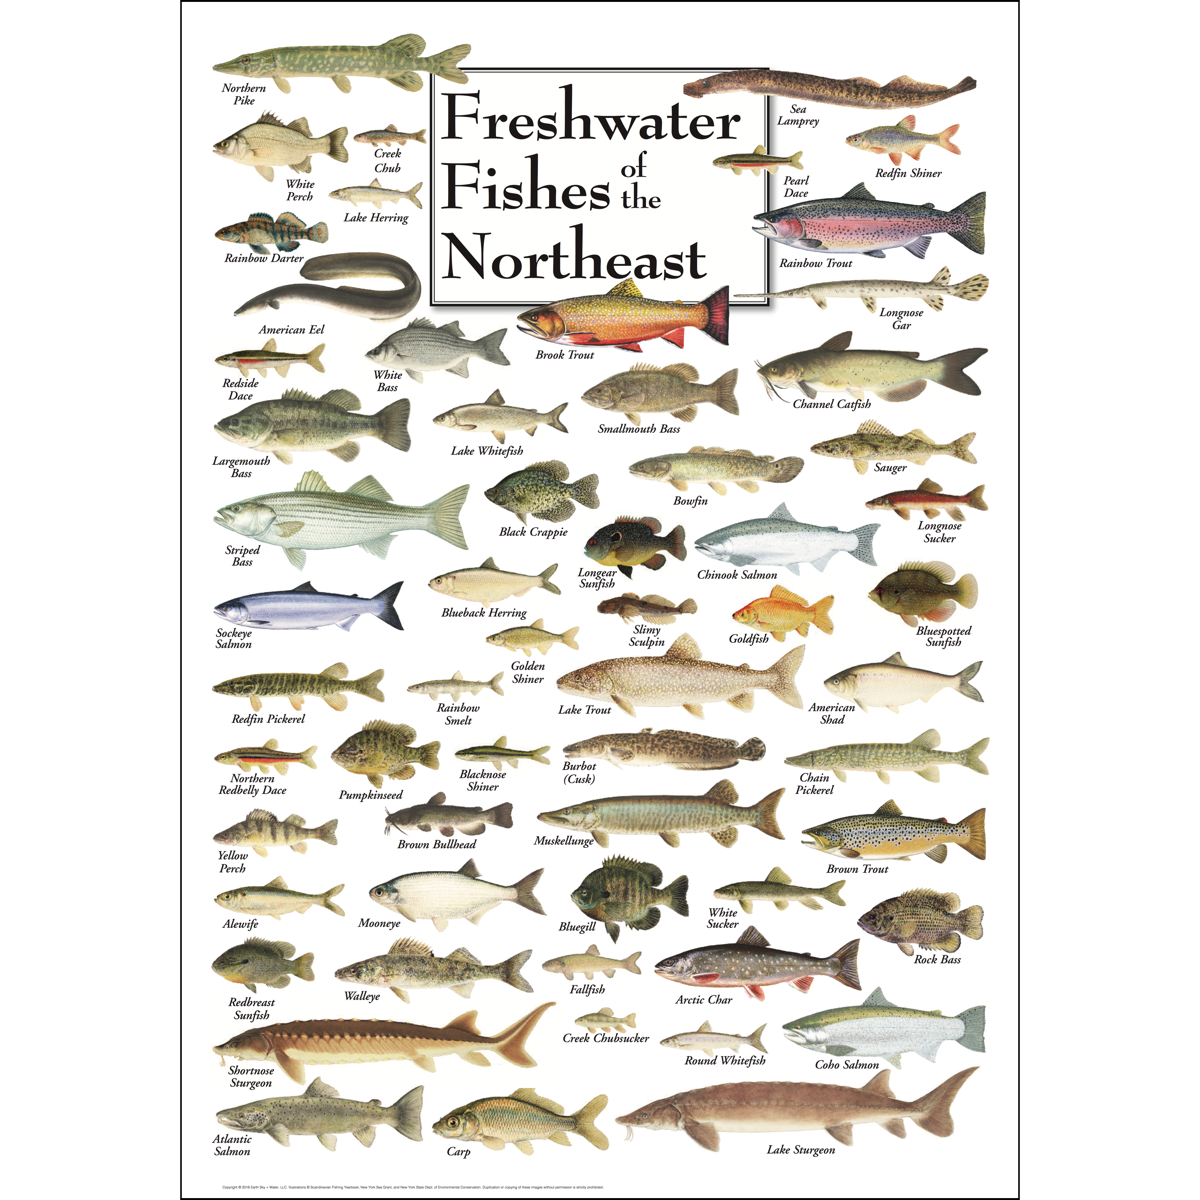 FRESHWATER FISHES OF THE NORTHEAST POSTER